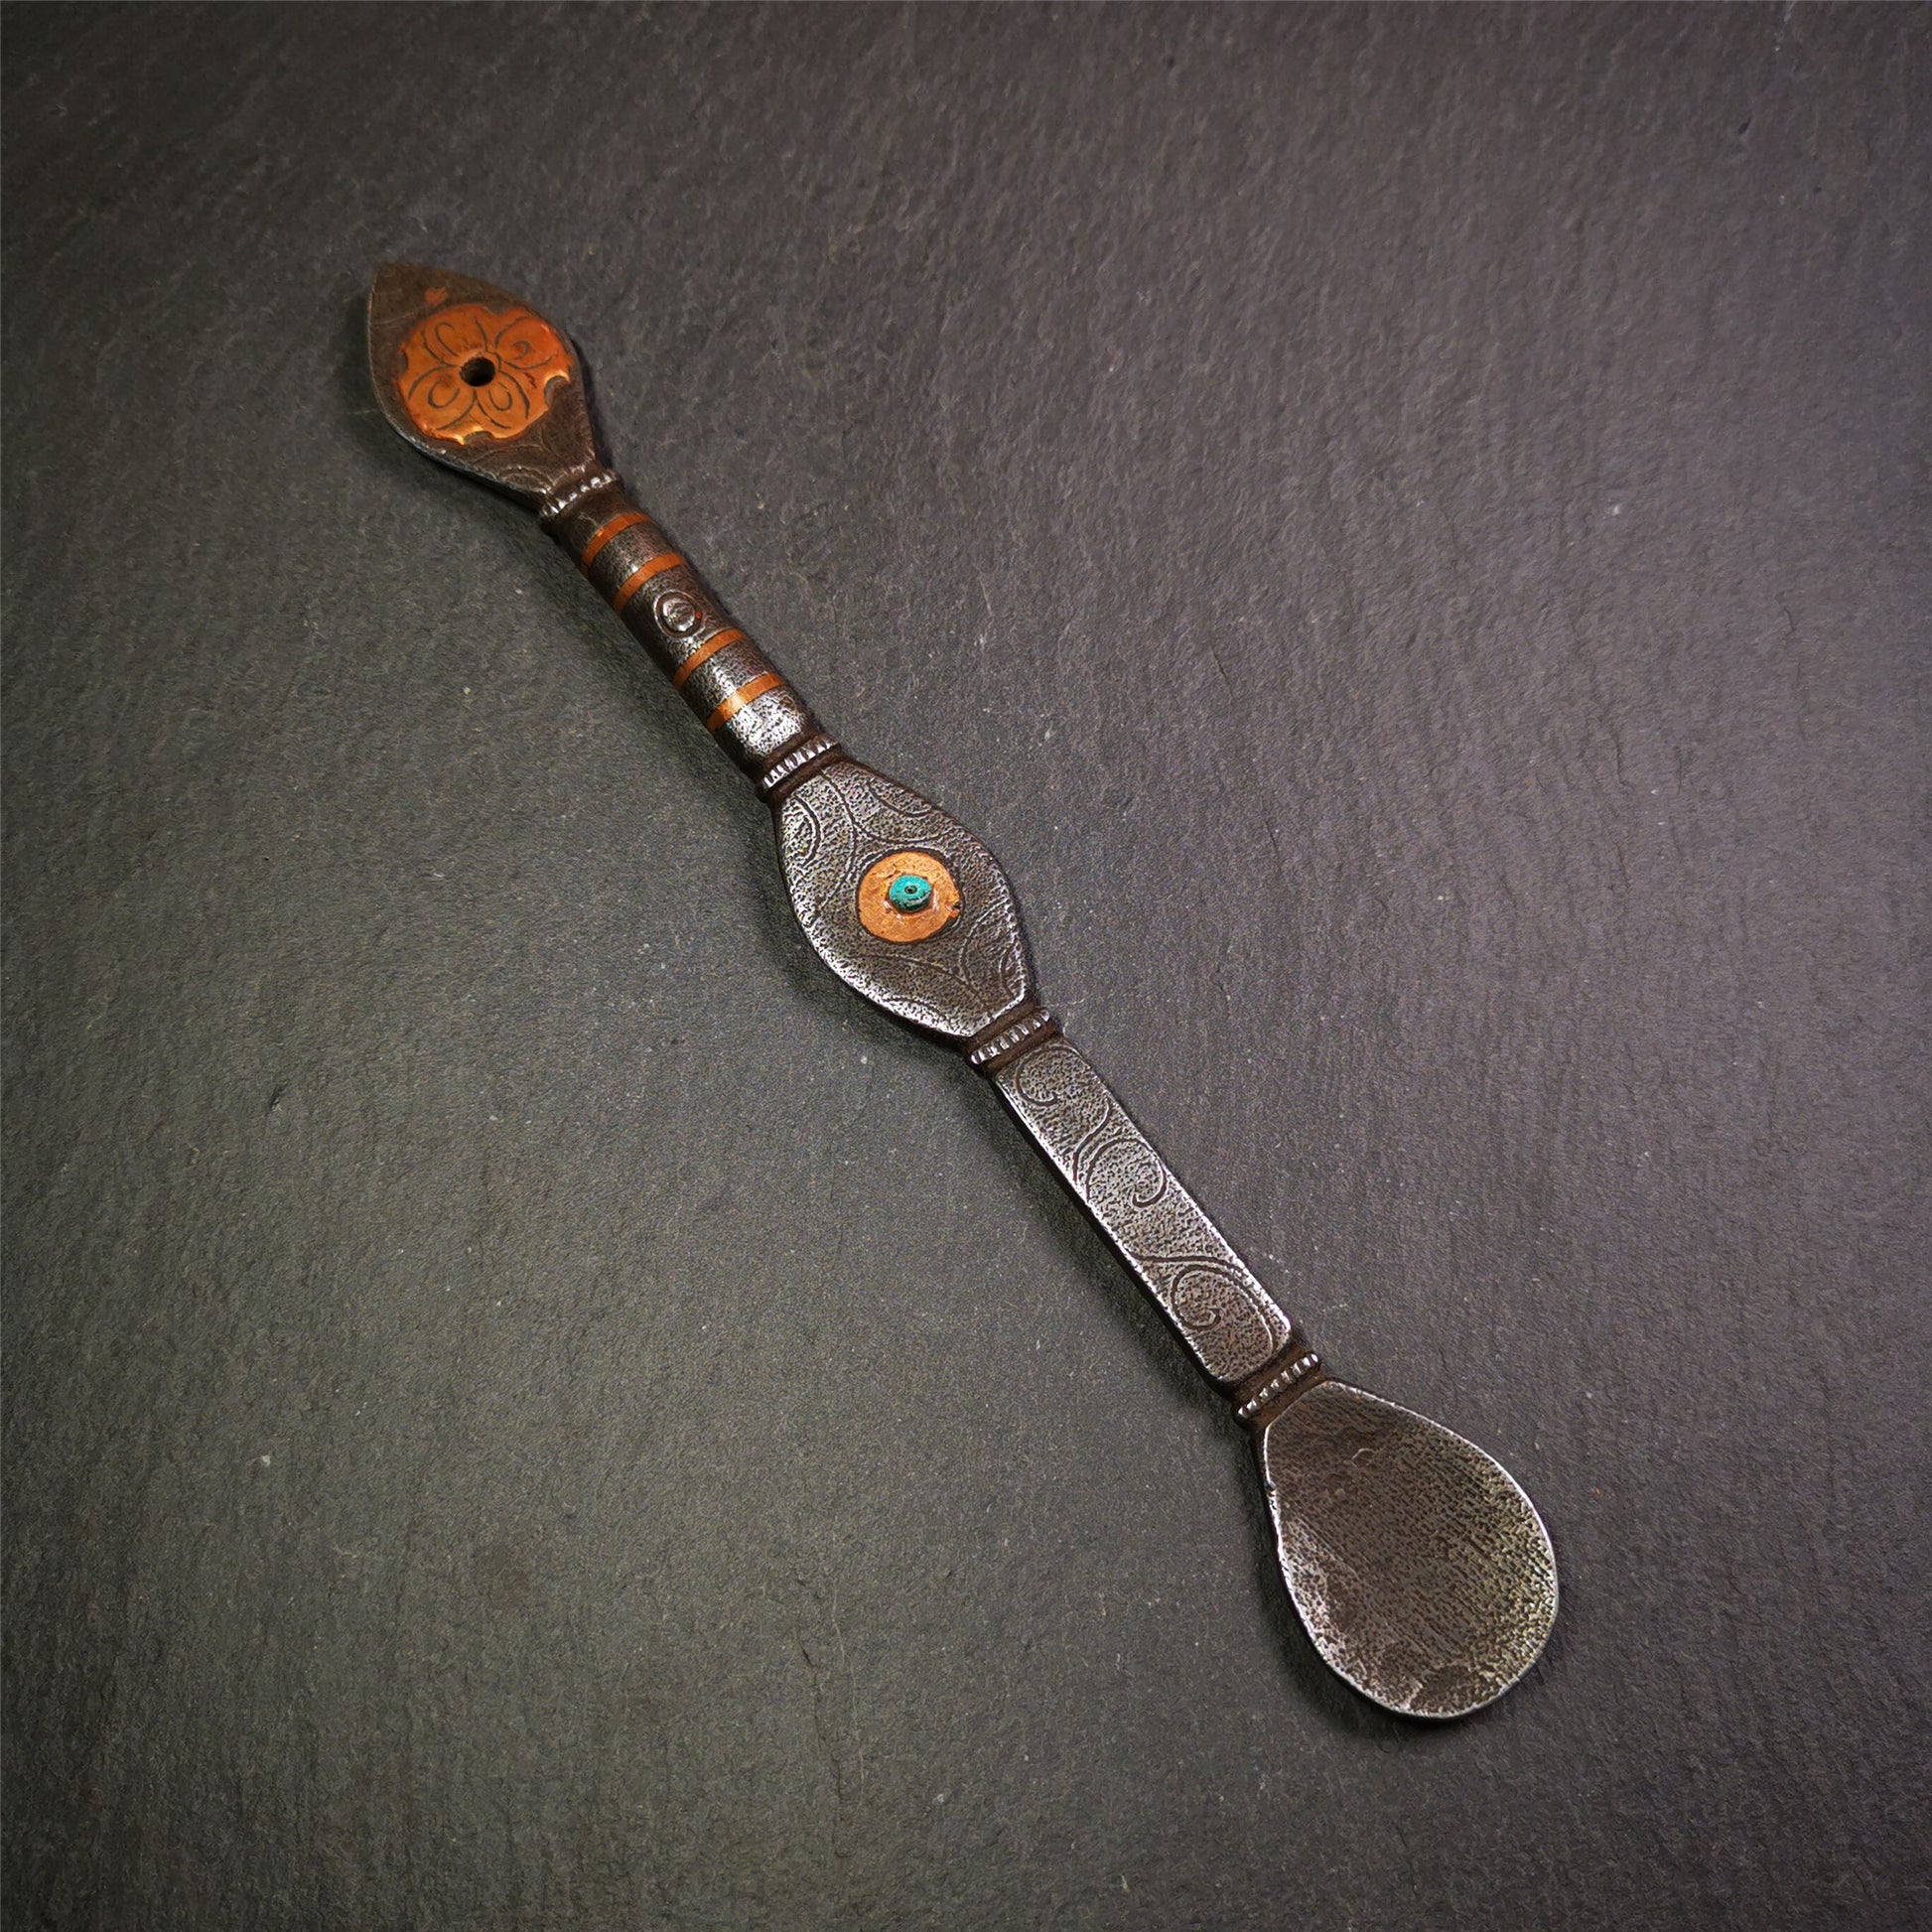 This spoon is handmade by Tibetan craftsmen from Tibet. It is entirely hand-carved with cold iron and copper,lenght about 7.5 inches. You can see teh intricate engraved detail along the handle, neck and bowl,very beautiful.